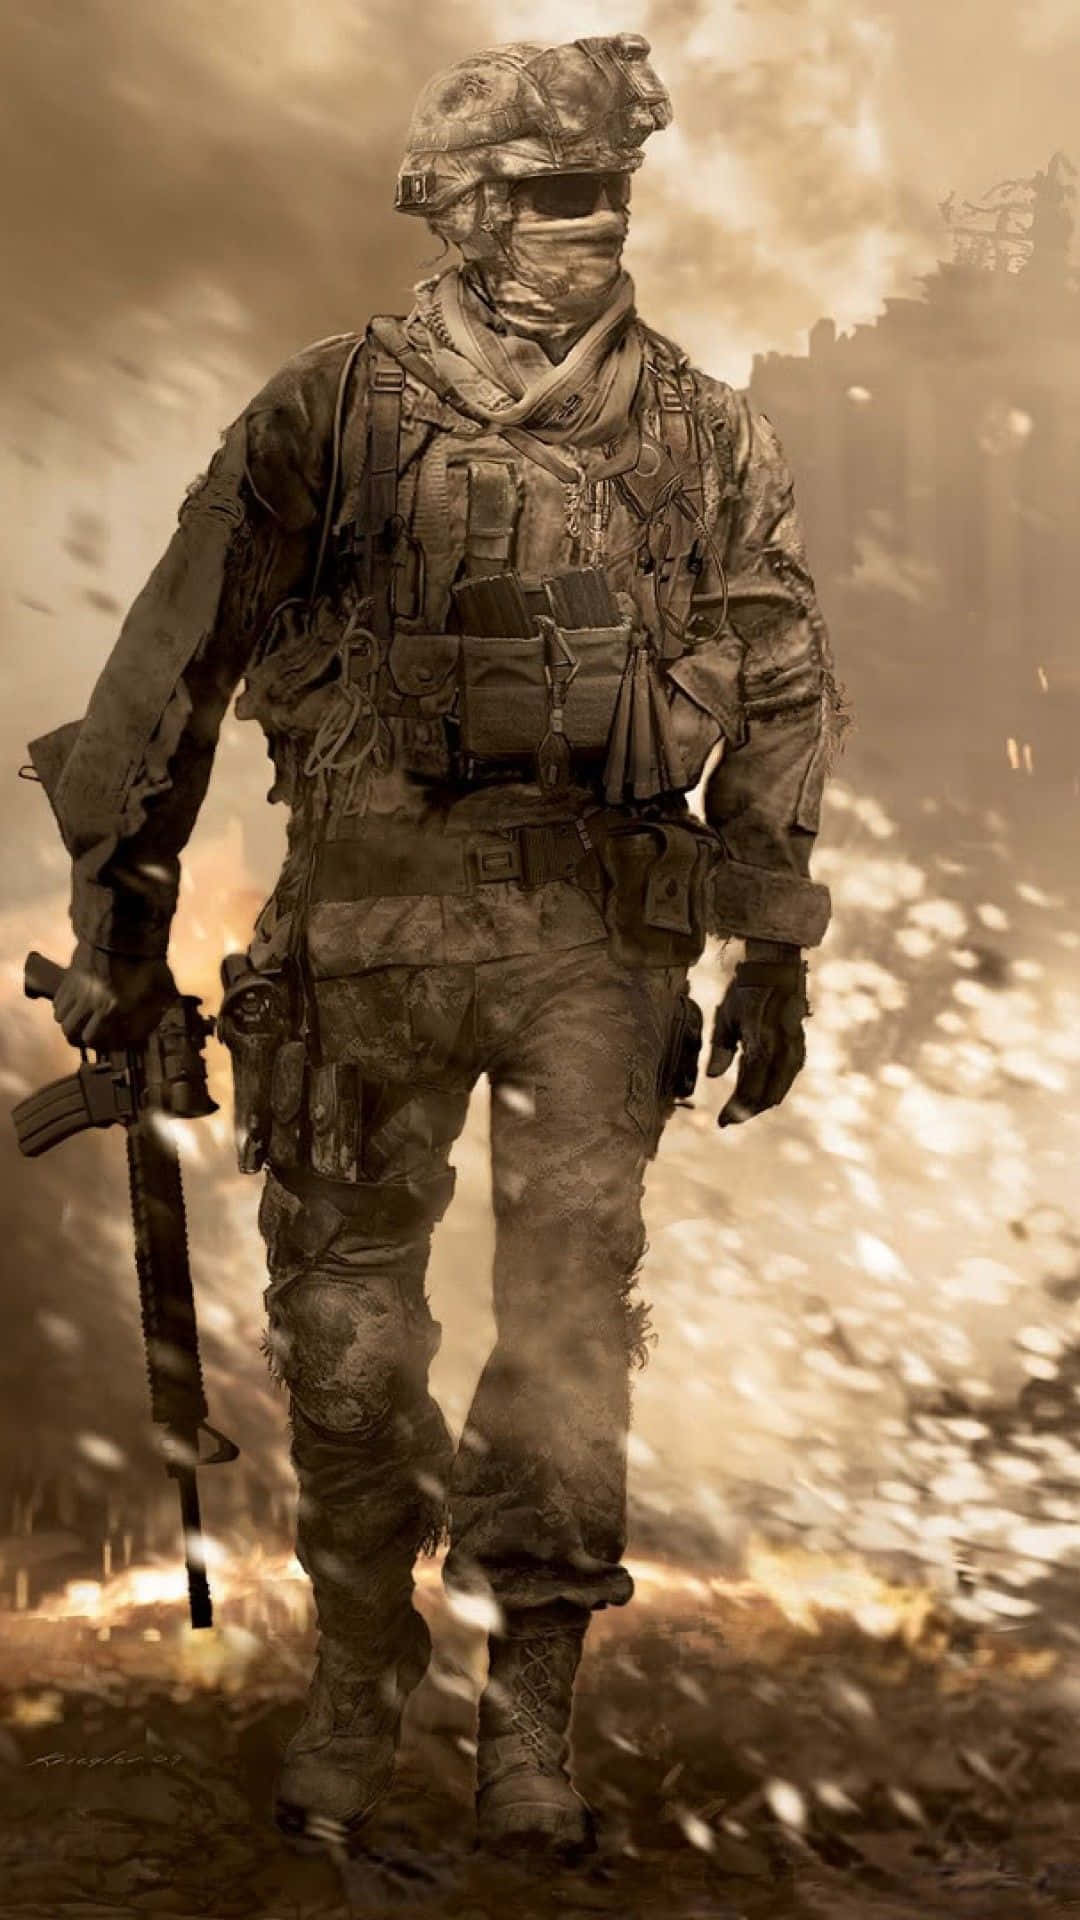 Intense Call of Duty Soldiers Ready for Battle in High-Definition Wallpaper Wallpaper